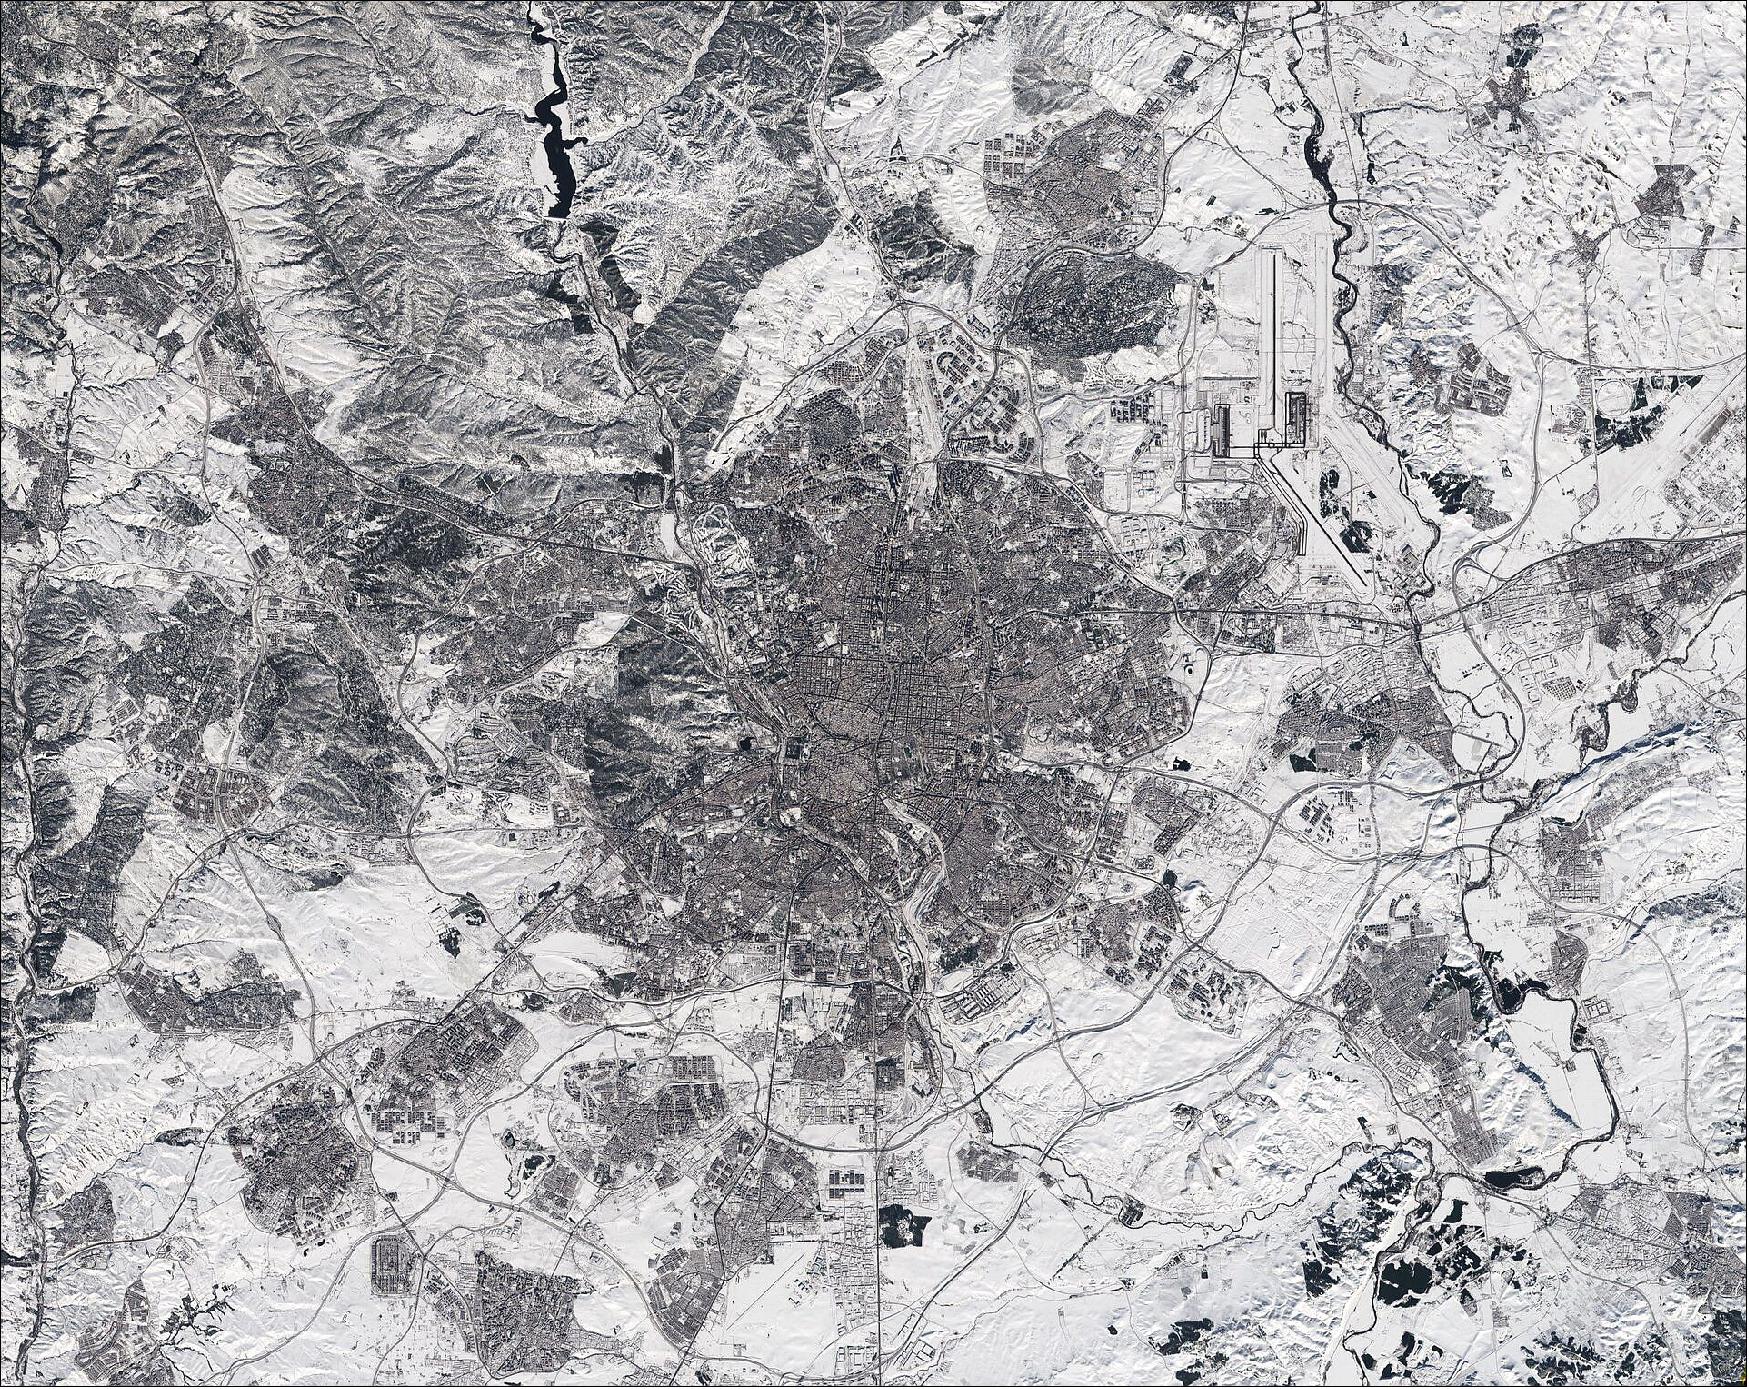 Figure 79: Although this satellite image was taken after the storm had passed, it is clear to see that much snow still remains, especially in the outskirts of the city. For example, some runways at the airport, which is visible in the top-right of the image, are still covered by snow. The unusual cold weather on the Iberian Peninsula is expected to last until later this week with temperatures forecasted to plunge to –12ºC. The race is on to clear roads so that supplies of essential goods such as food supplies and Covid vaccines can be delivered (image credit: ESA, the image contains modified Copernicus Sentinel data (2021), processed by ESA, CC BY-SA 3.0 IGO)